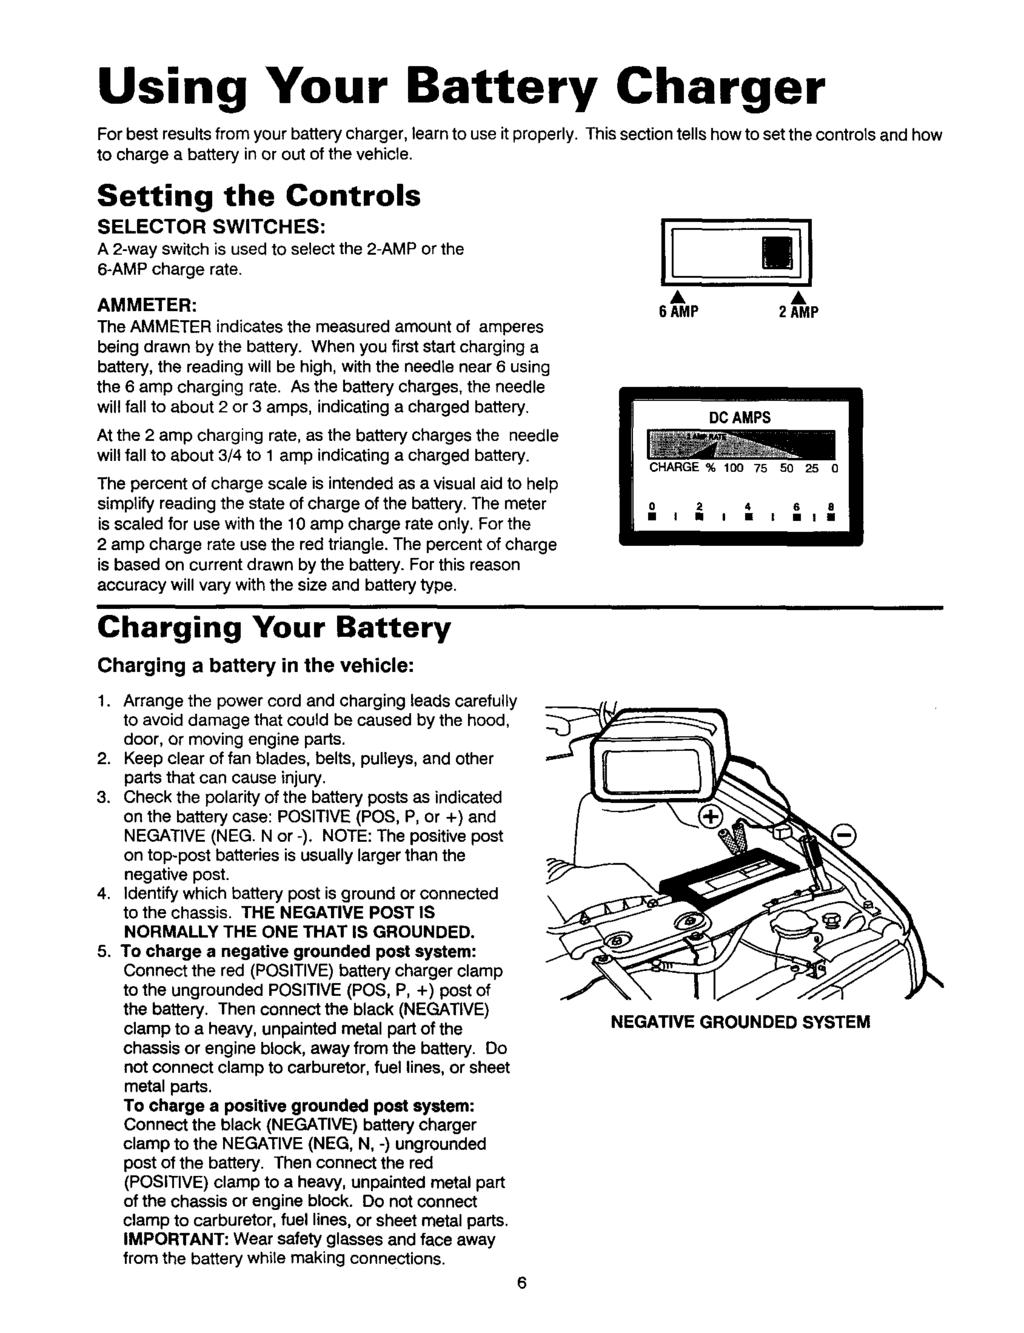 Using Your Battery Charger For best results from your battery charger, learn to use it properly. to charge a battery in or out of the vehicle.